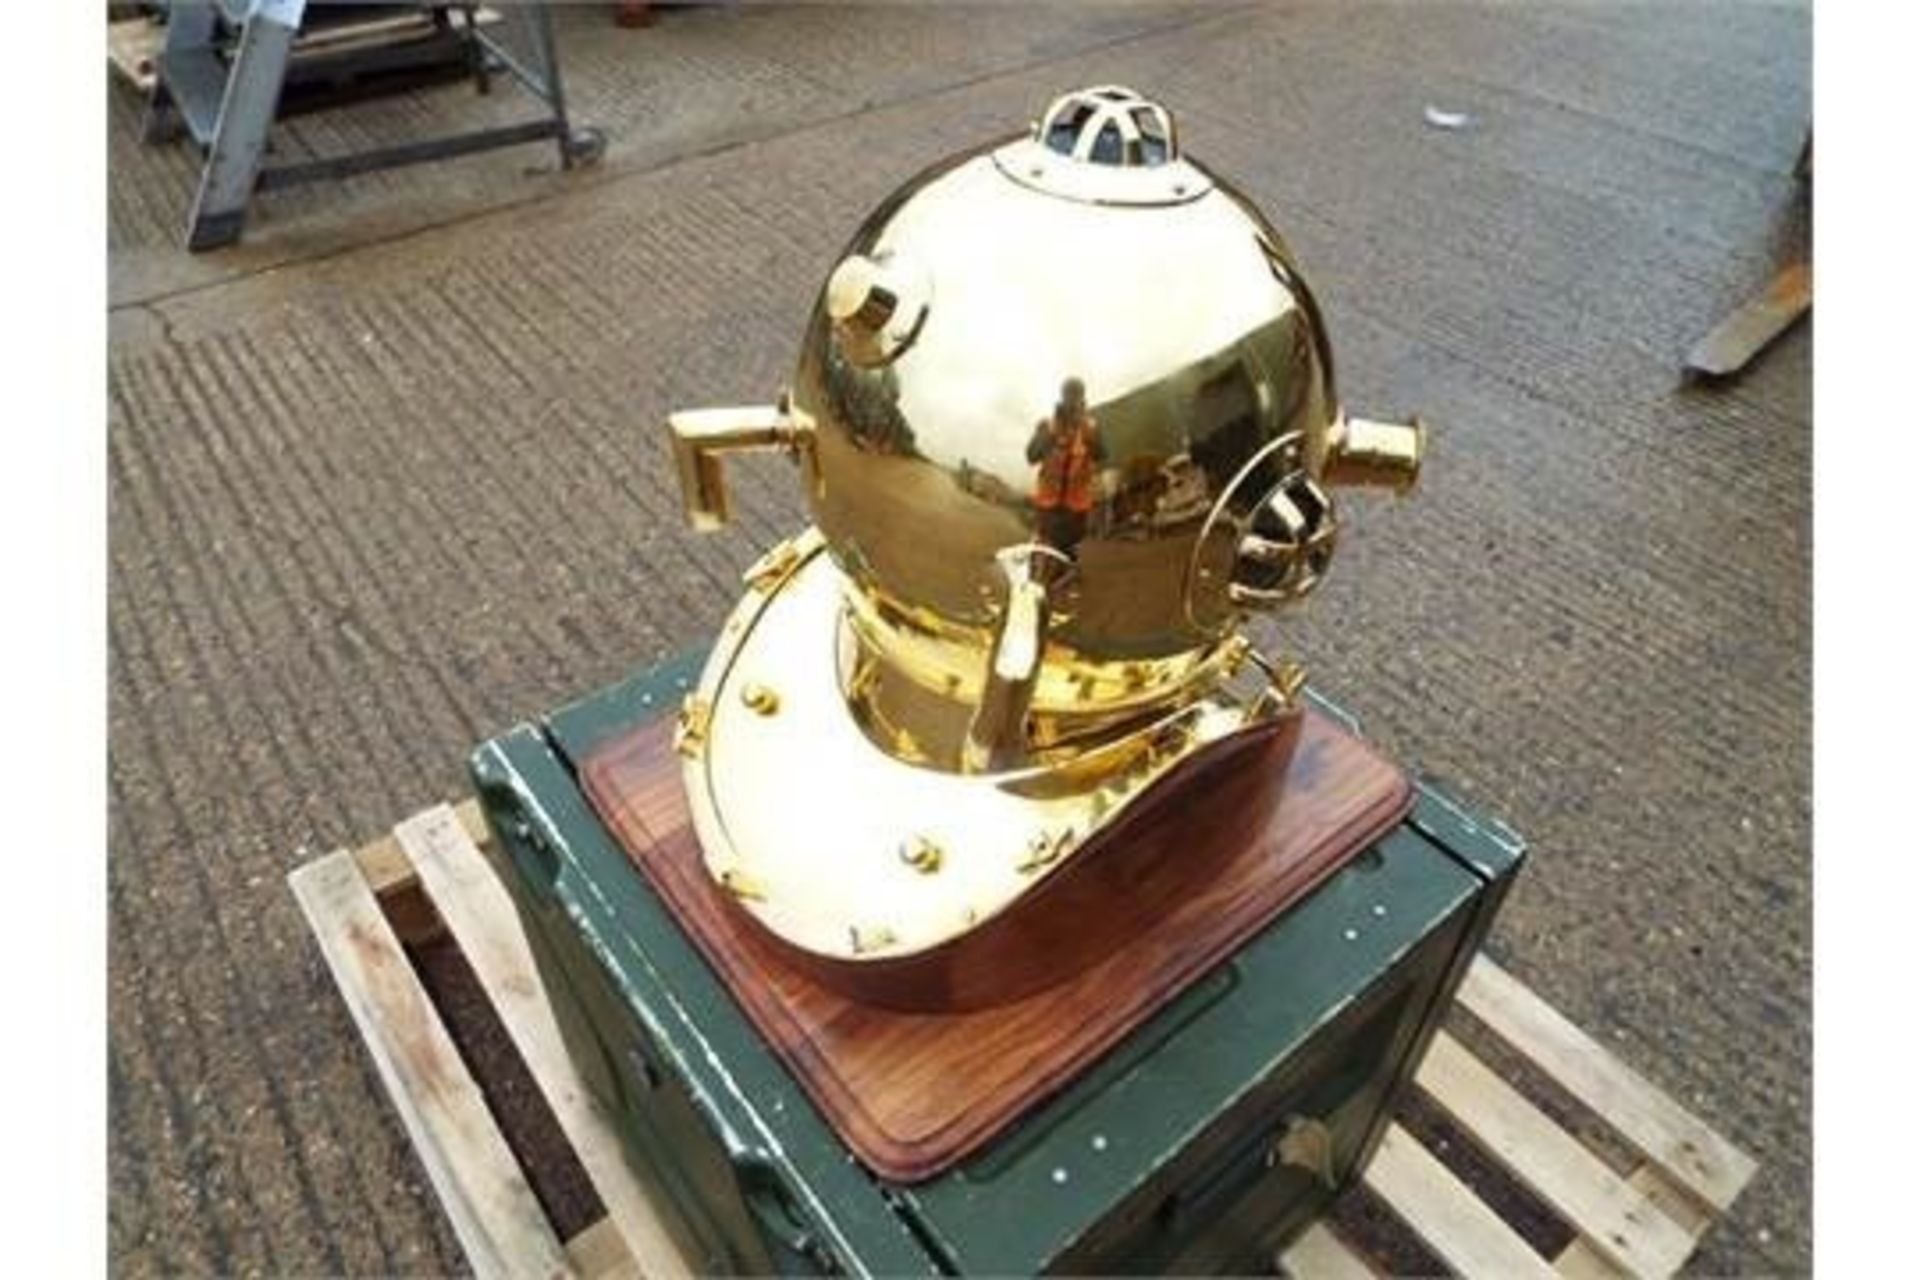 Replica Full Size U.S. Navy Mark V Brass Diving Helmet on Wooden Display Stand - Image 3 of 5